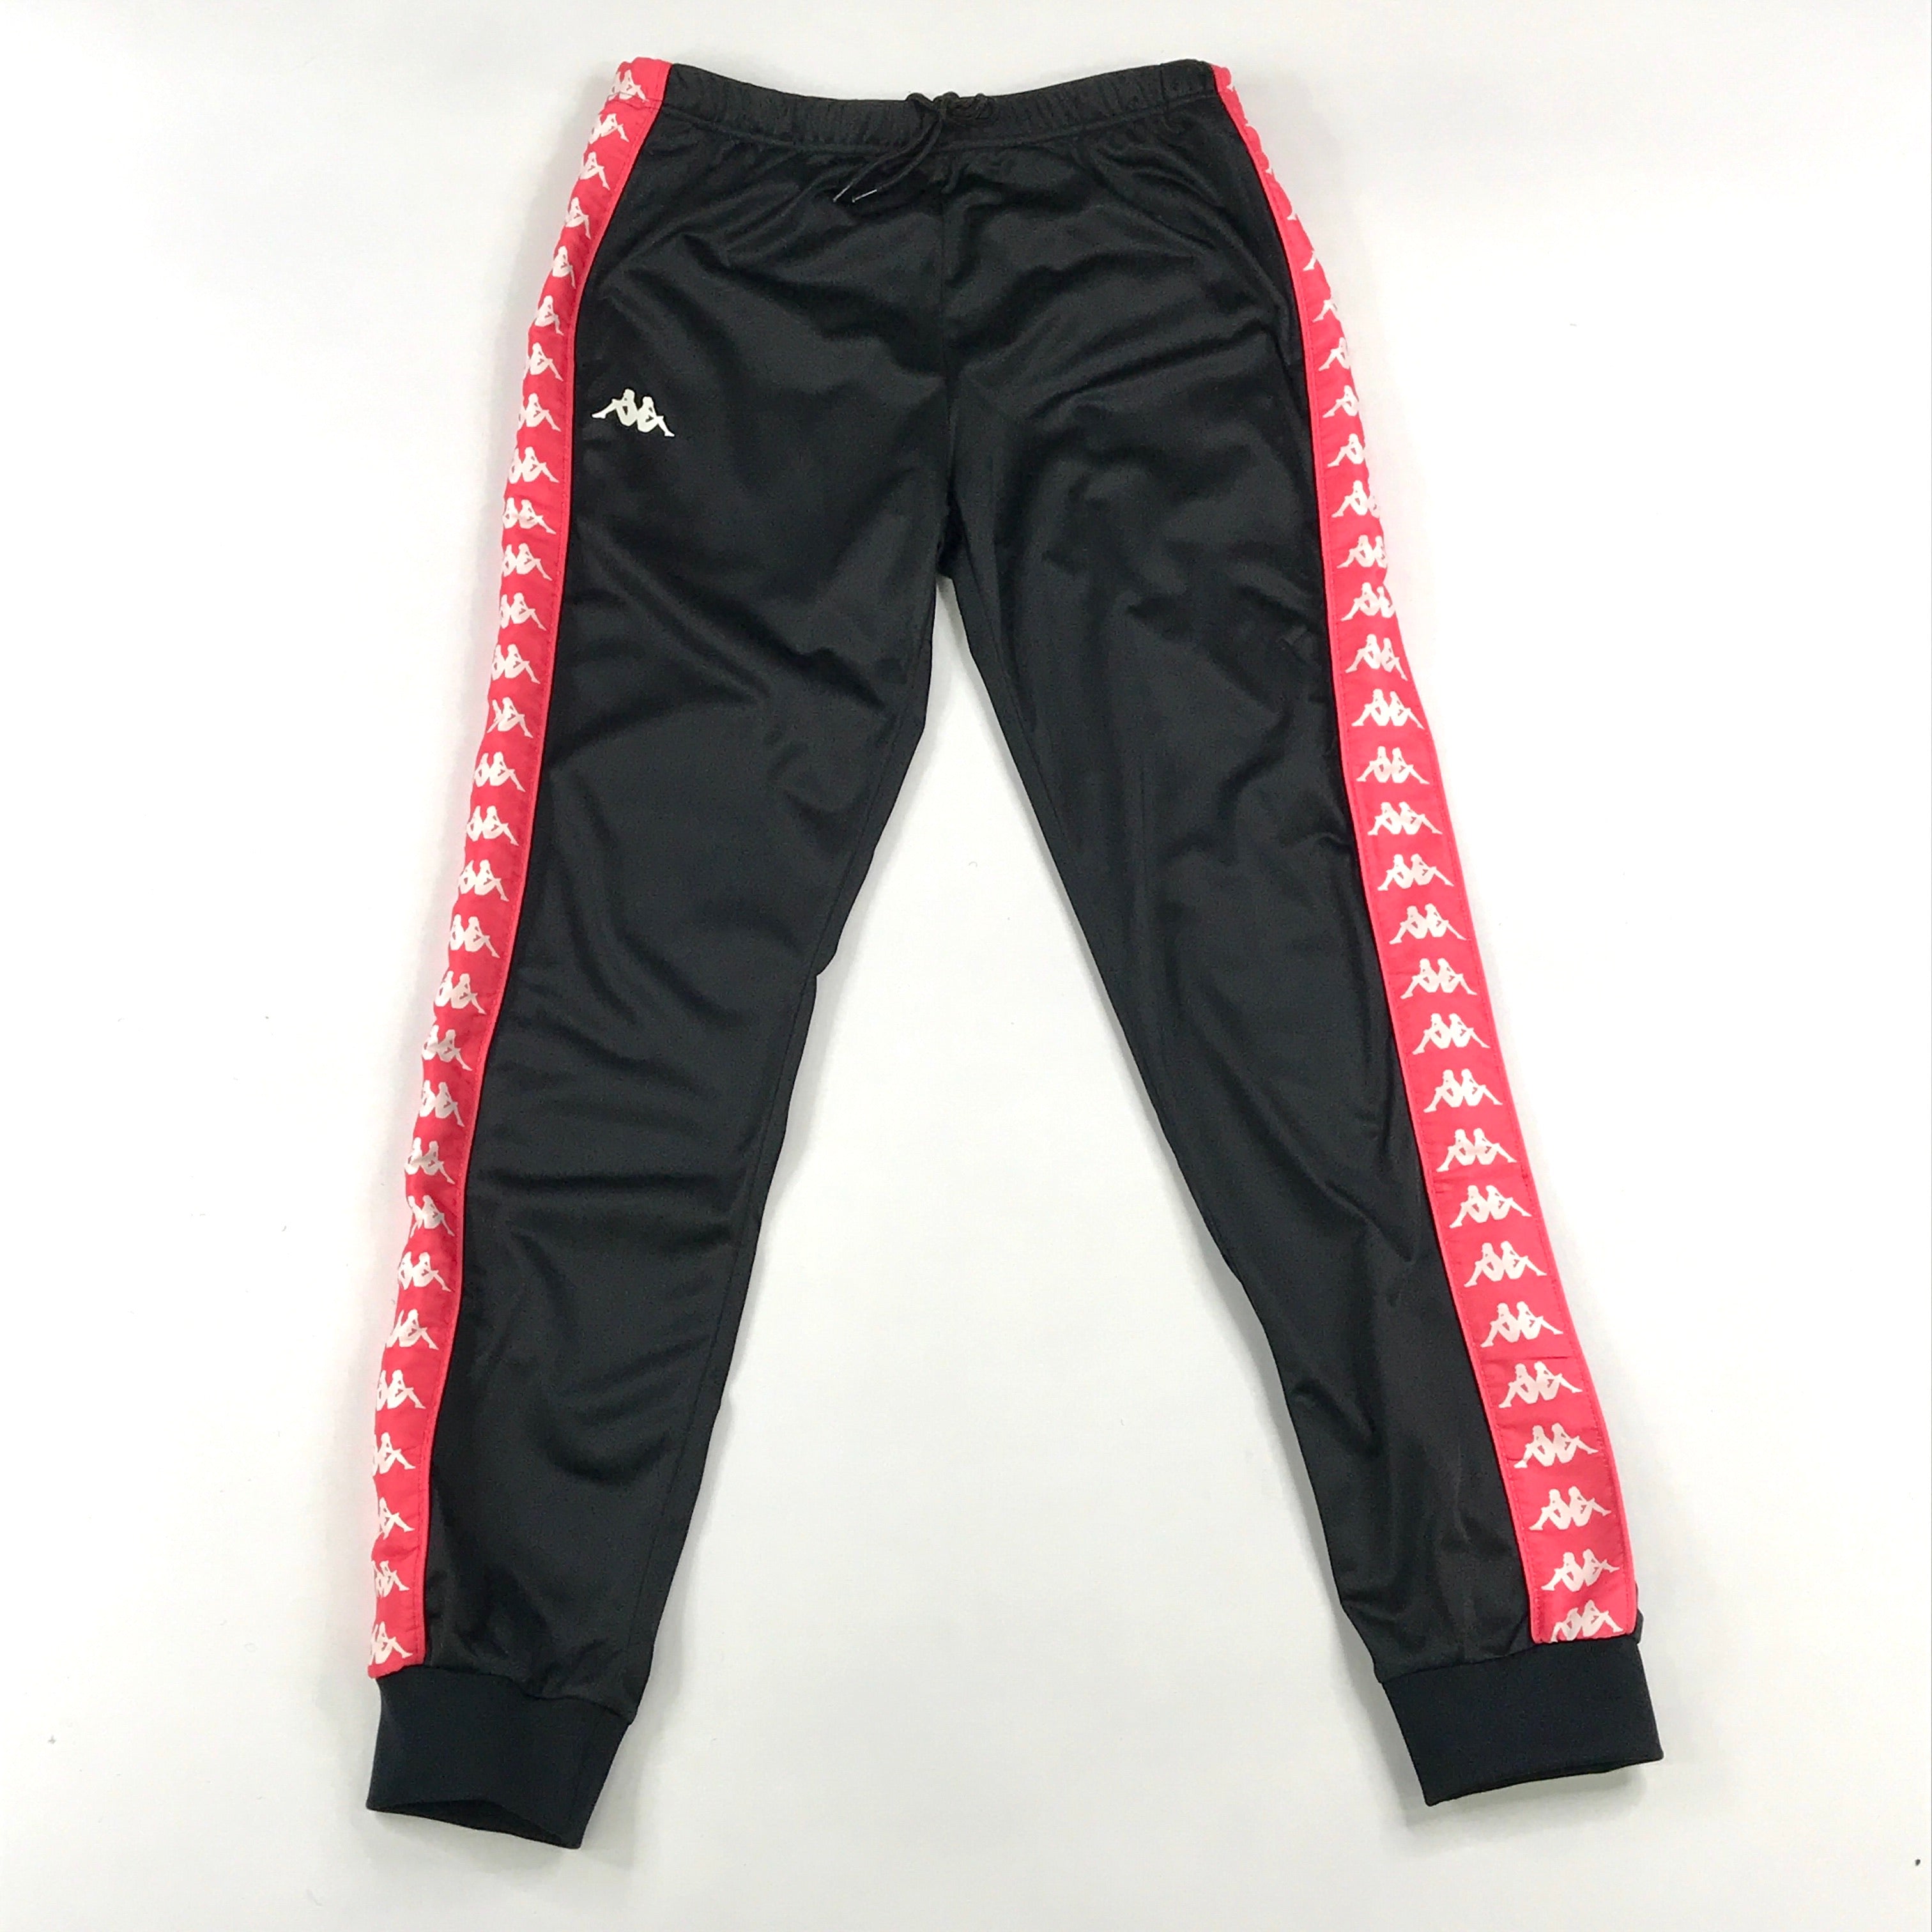 Kappa Women's Active Wastoria Track Pants Size S Soft Pink/Black for sale  online